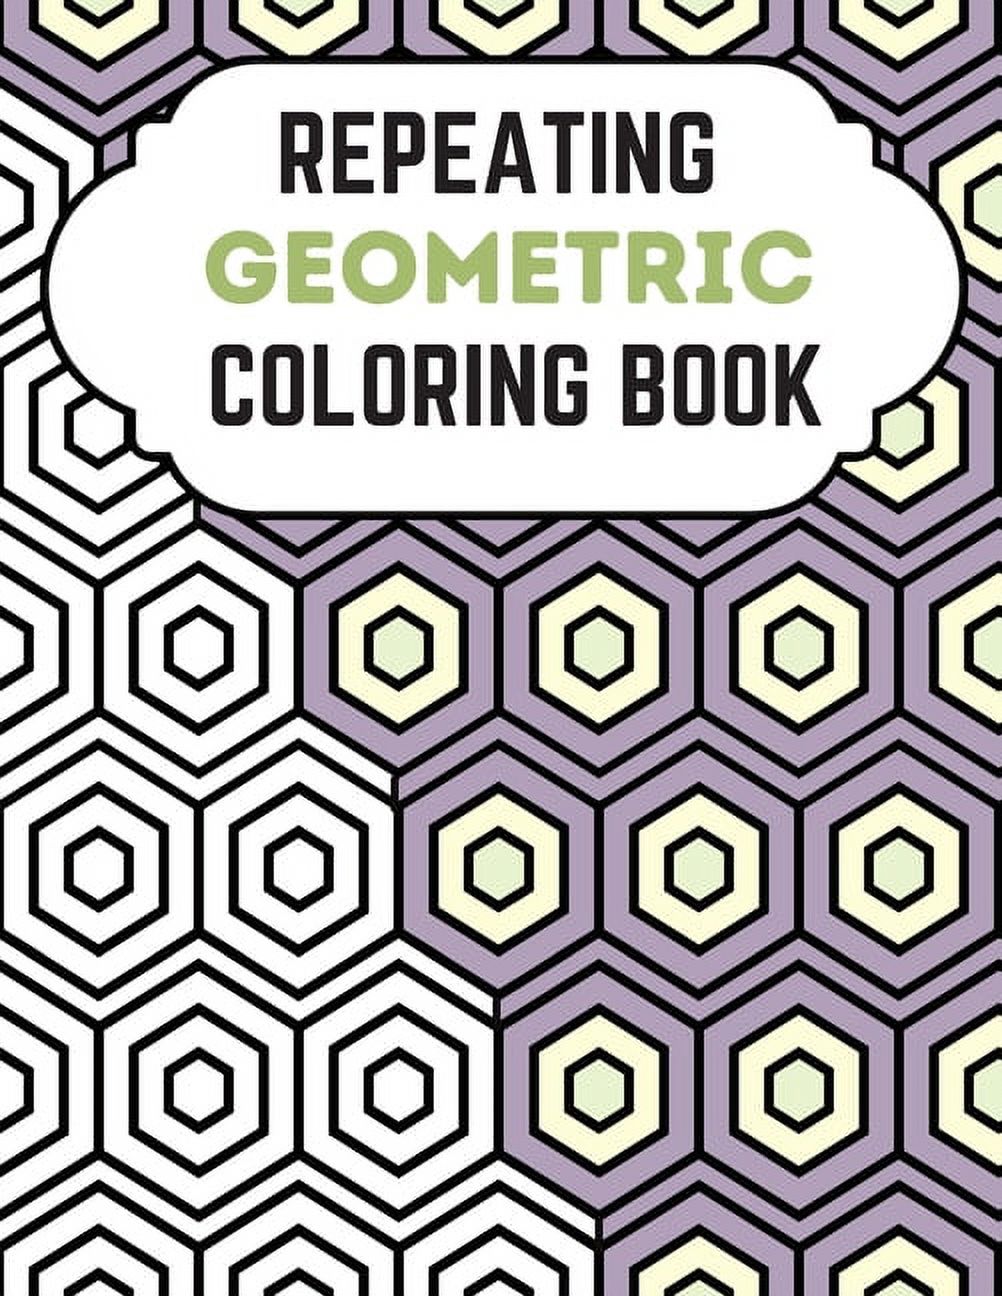 Repeating Geometric Coloring Book: Relax And Relief Stress With Adult Coloring Book Geometric, Modern Geometric Design And Geometric Patterns Ready For Coloring (Paperback) - image 1 of 1